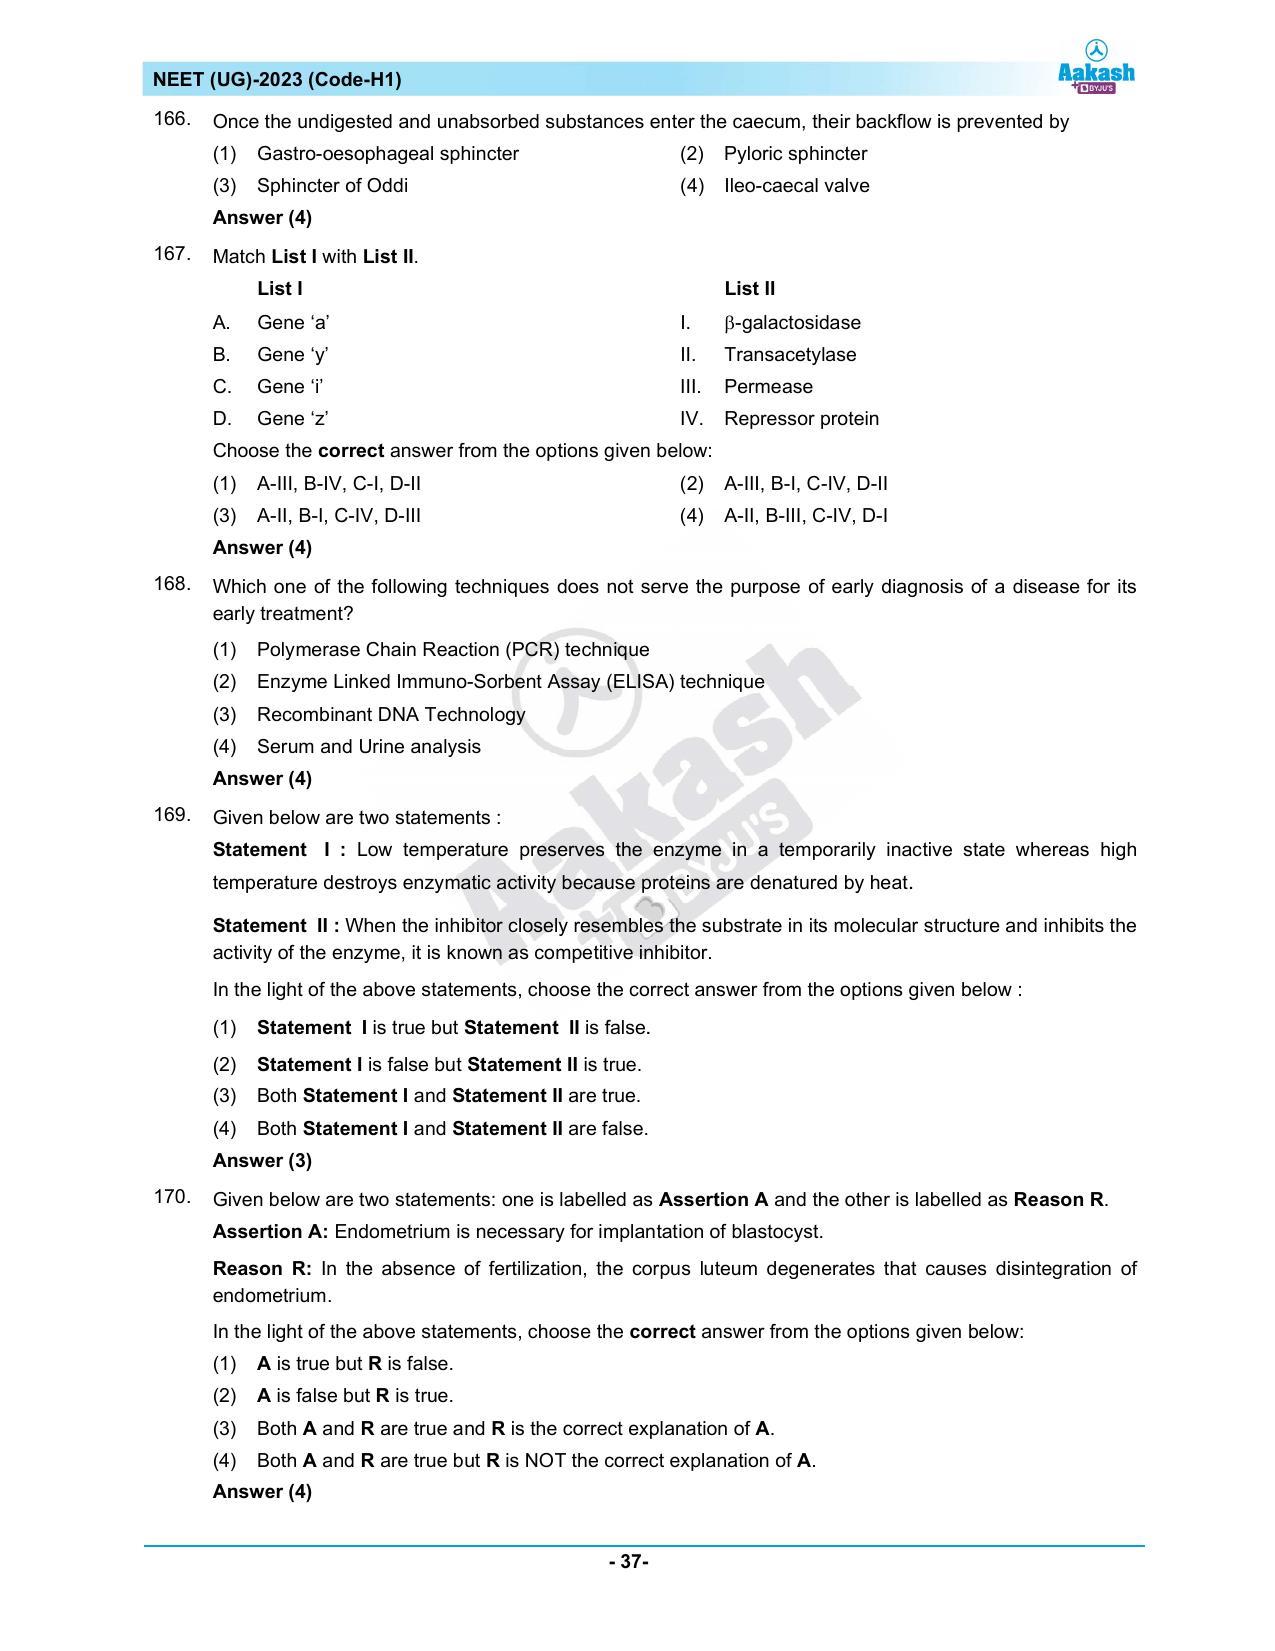 NEET 2023 Question Paper H1 - Page 37